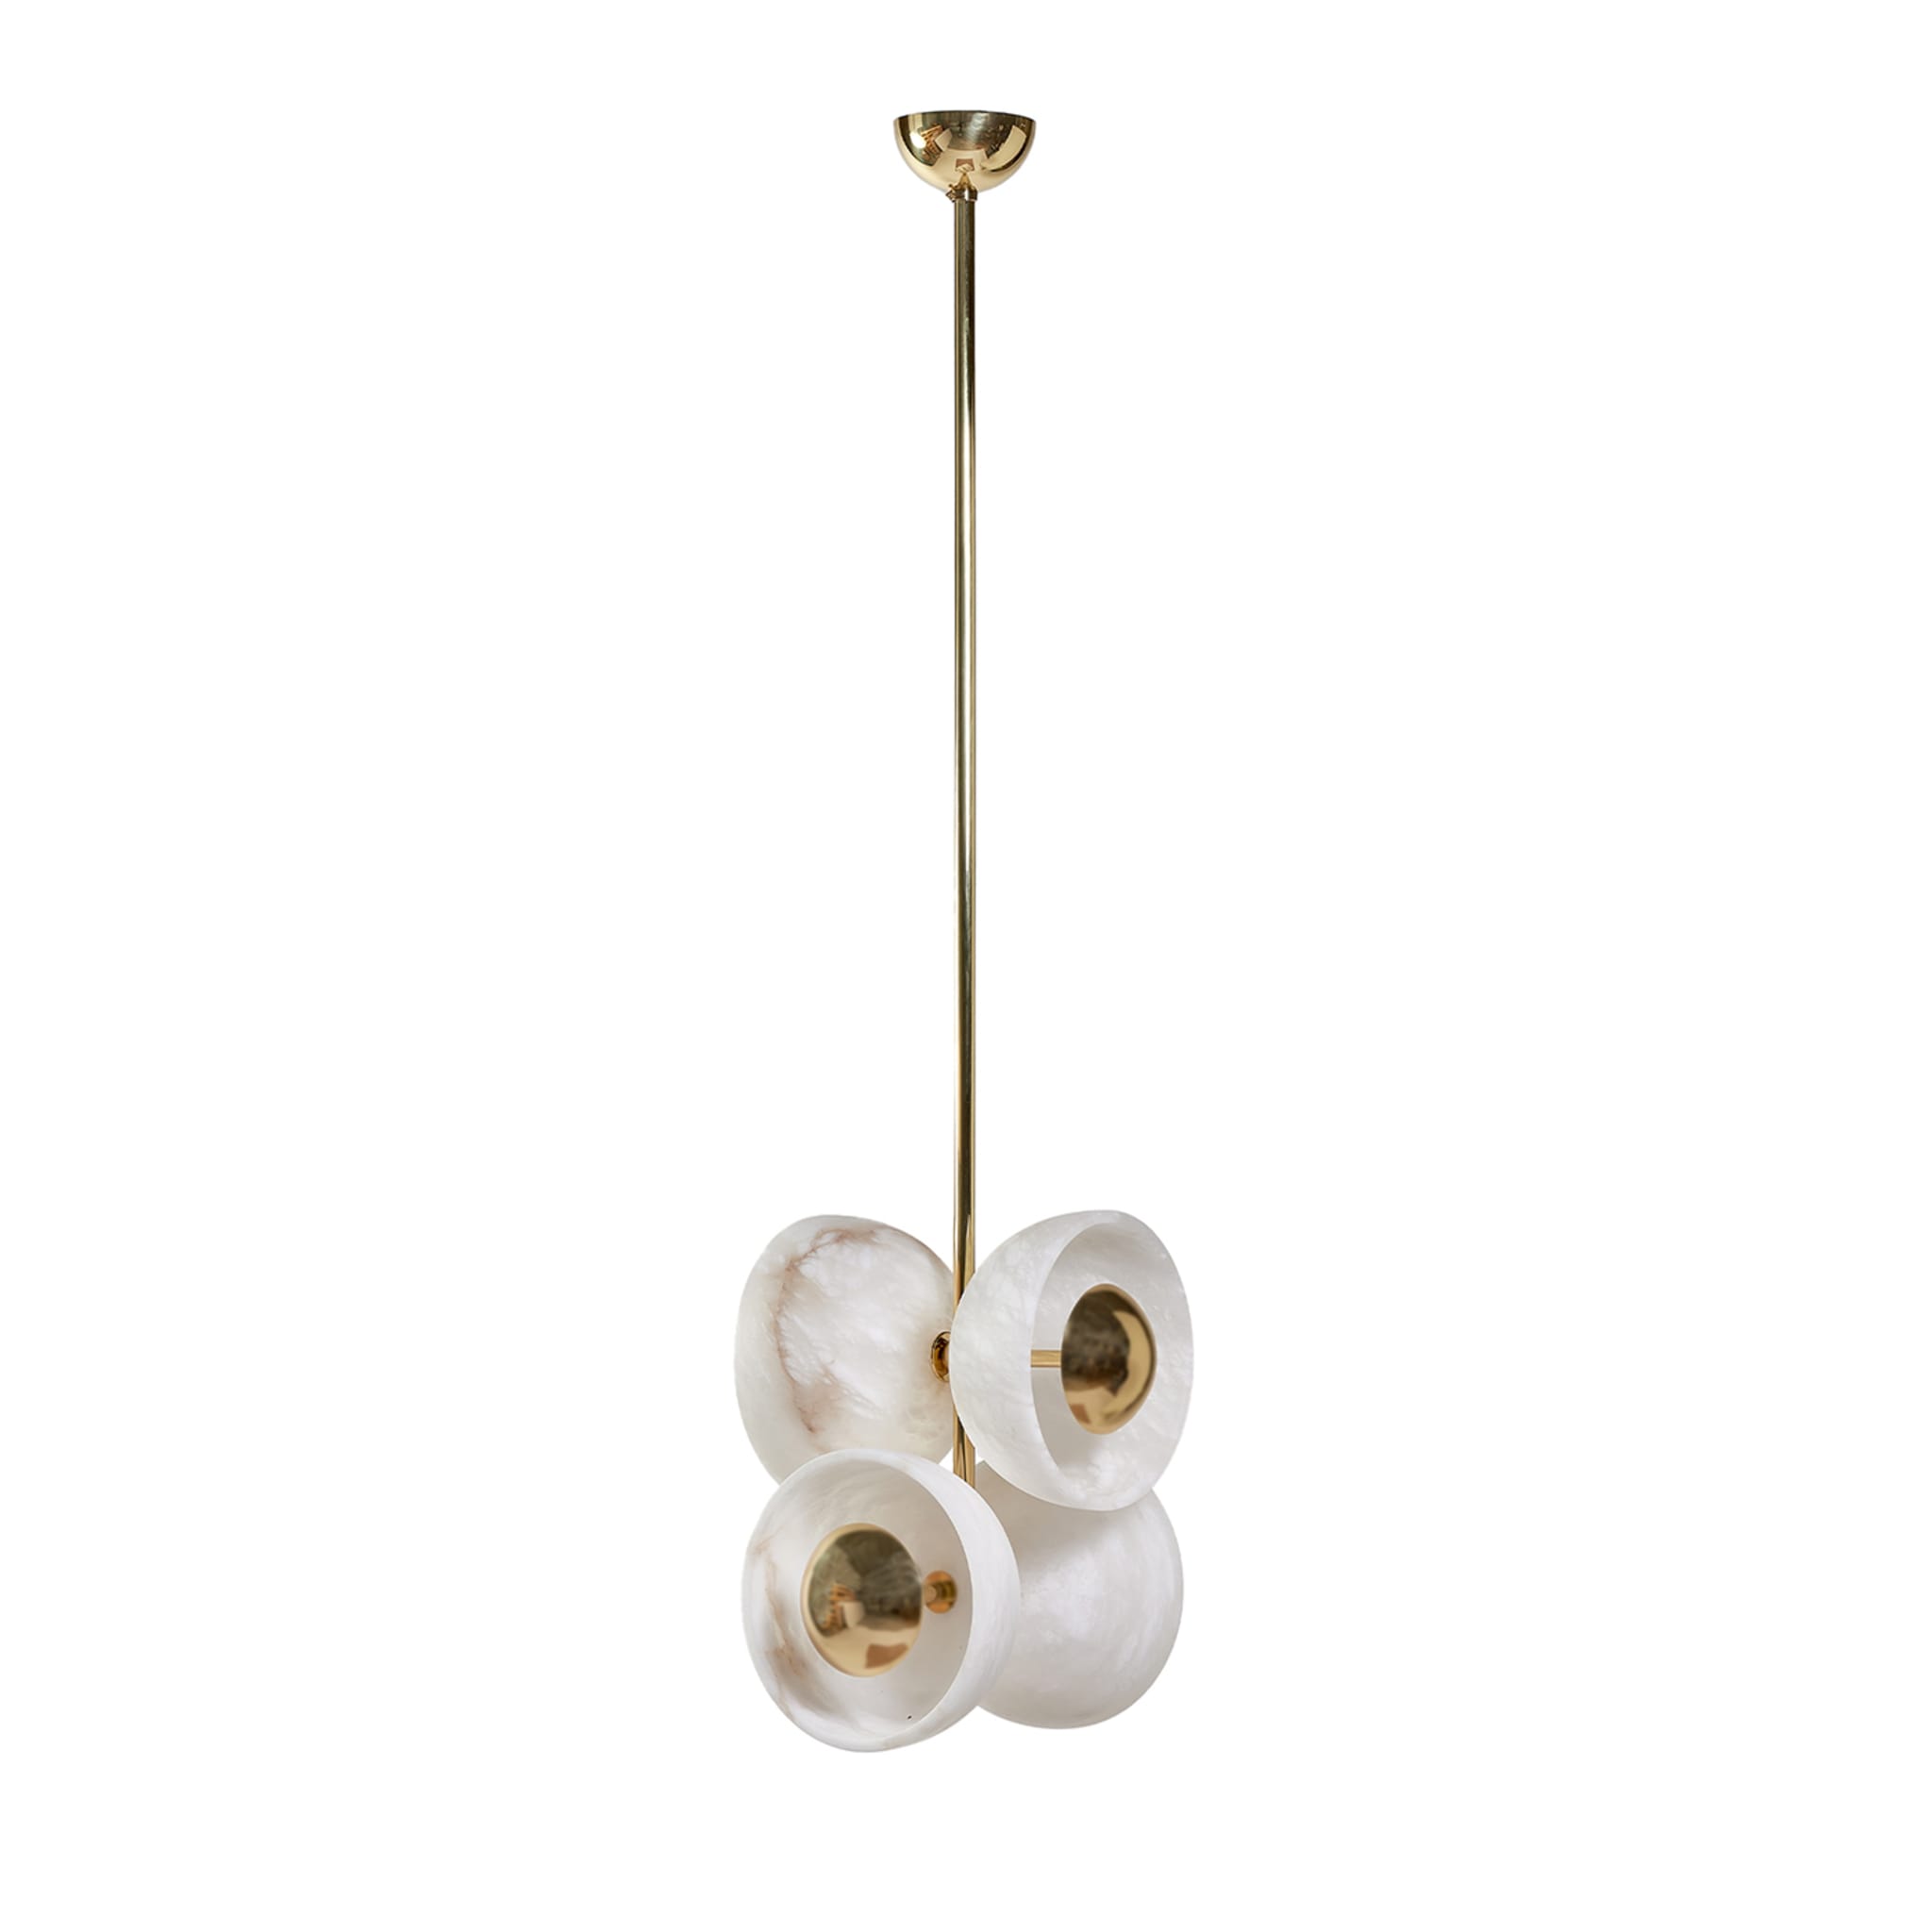 "Butterfly" Pendant Lamp in Polished Brass and Alabaster - Main view